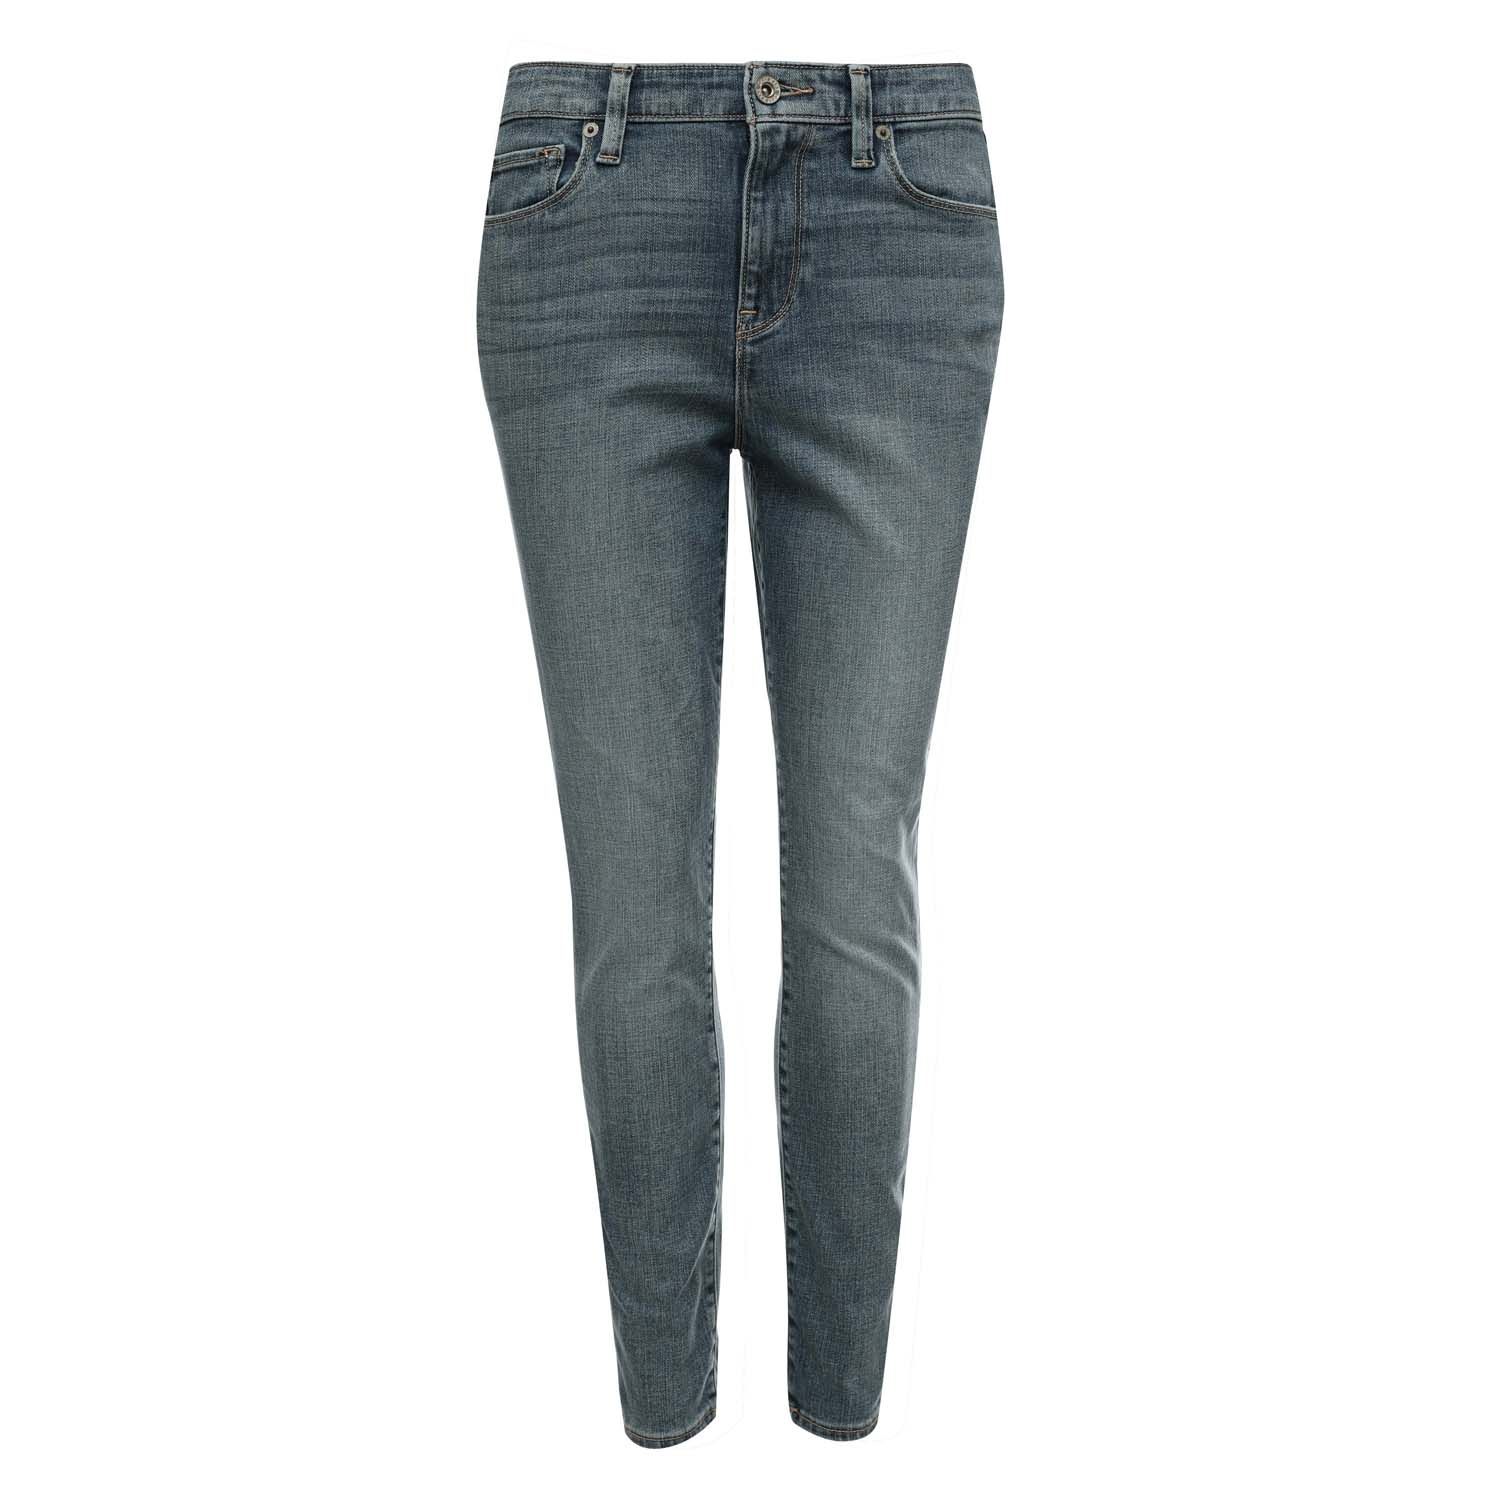 Womens Delancey High Rise Skinny Jeans